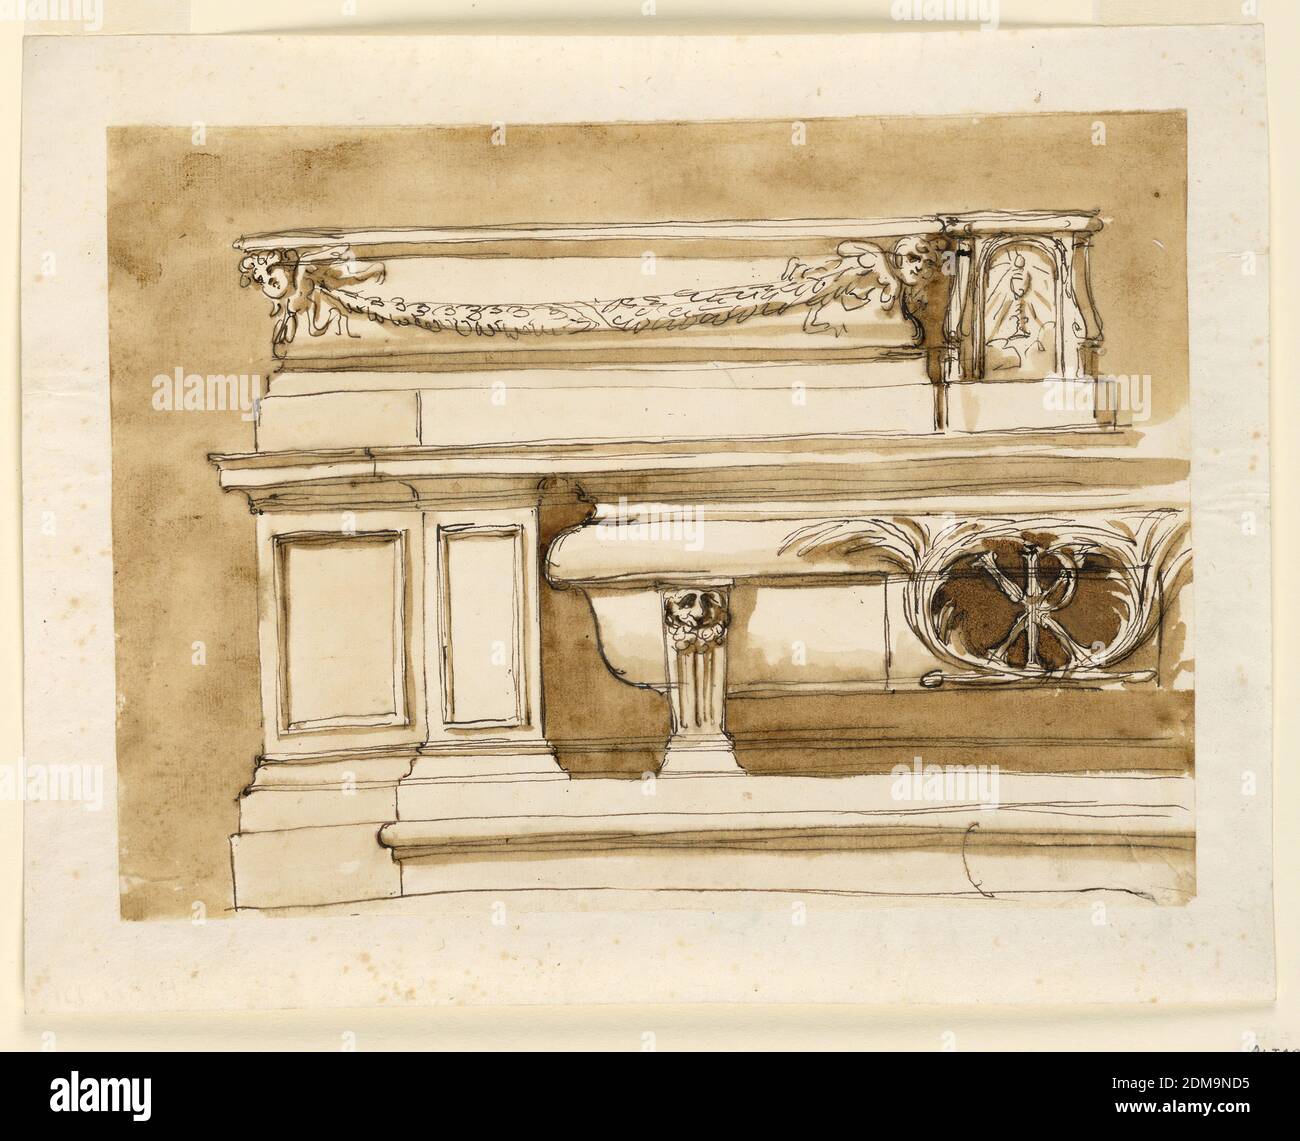 Altar mensa, Giuseppe Barberi, Italian, 1746–1809, Pen and brown ink, brush and brown wash on lined off-white laid paper, The left half is shown. The central part is projecting. One step leads to it. Laterally are molded panels. The bathtub sarcophagus is supported by a gaine with a lion mask. In the center is an ovoidal opening with a monogram in front and with a framing of palm branches. In the center of the ledge is the tabernacle. In front of the upper mouldings is a festoon supported by a cherubim., Rome, Italy, 1746-1809, architecture, Drawing Stock Photo